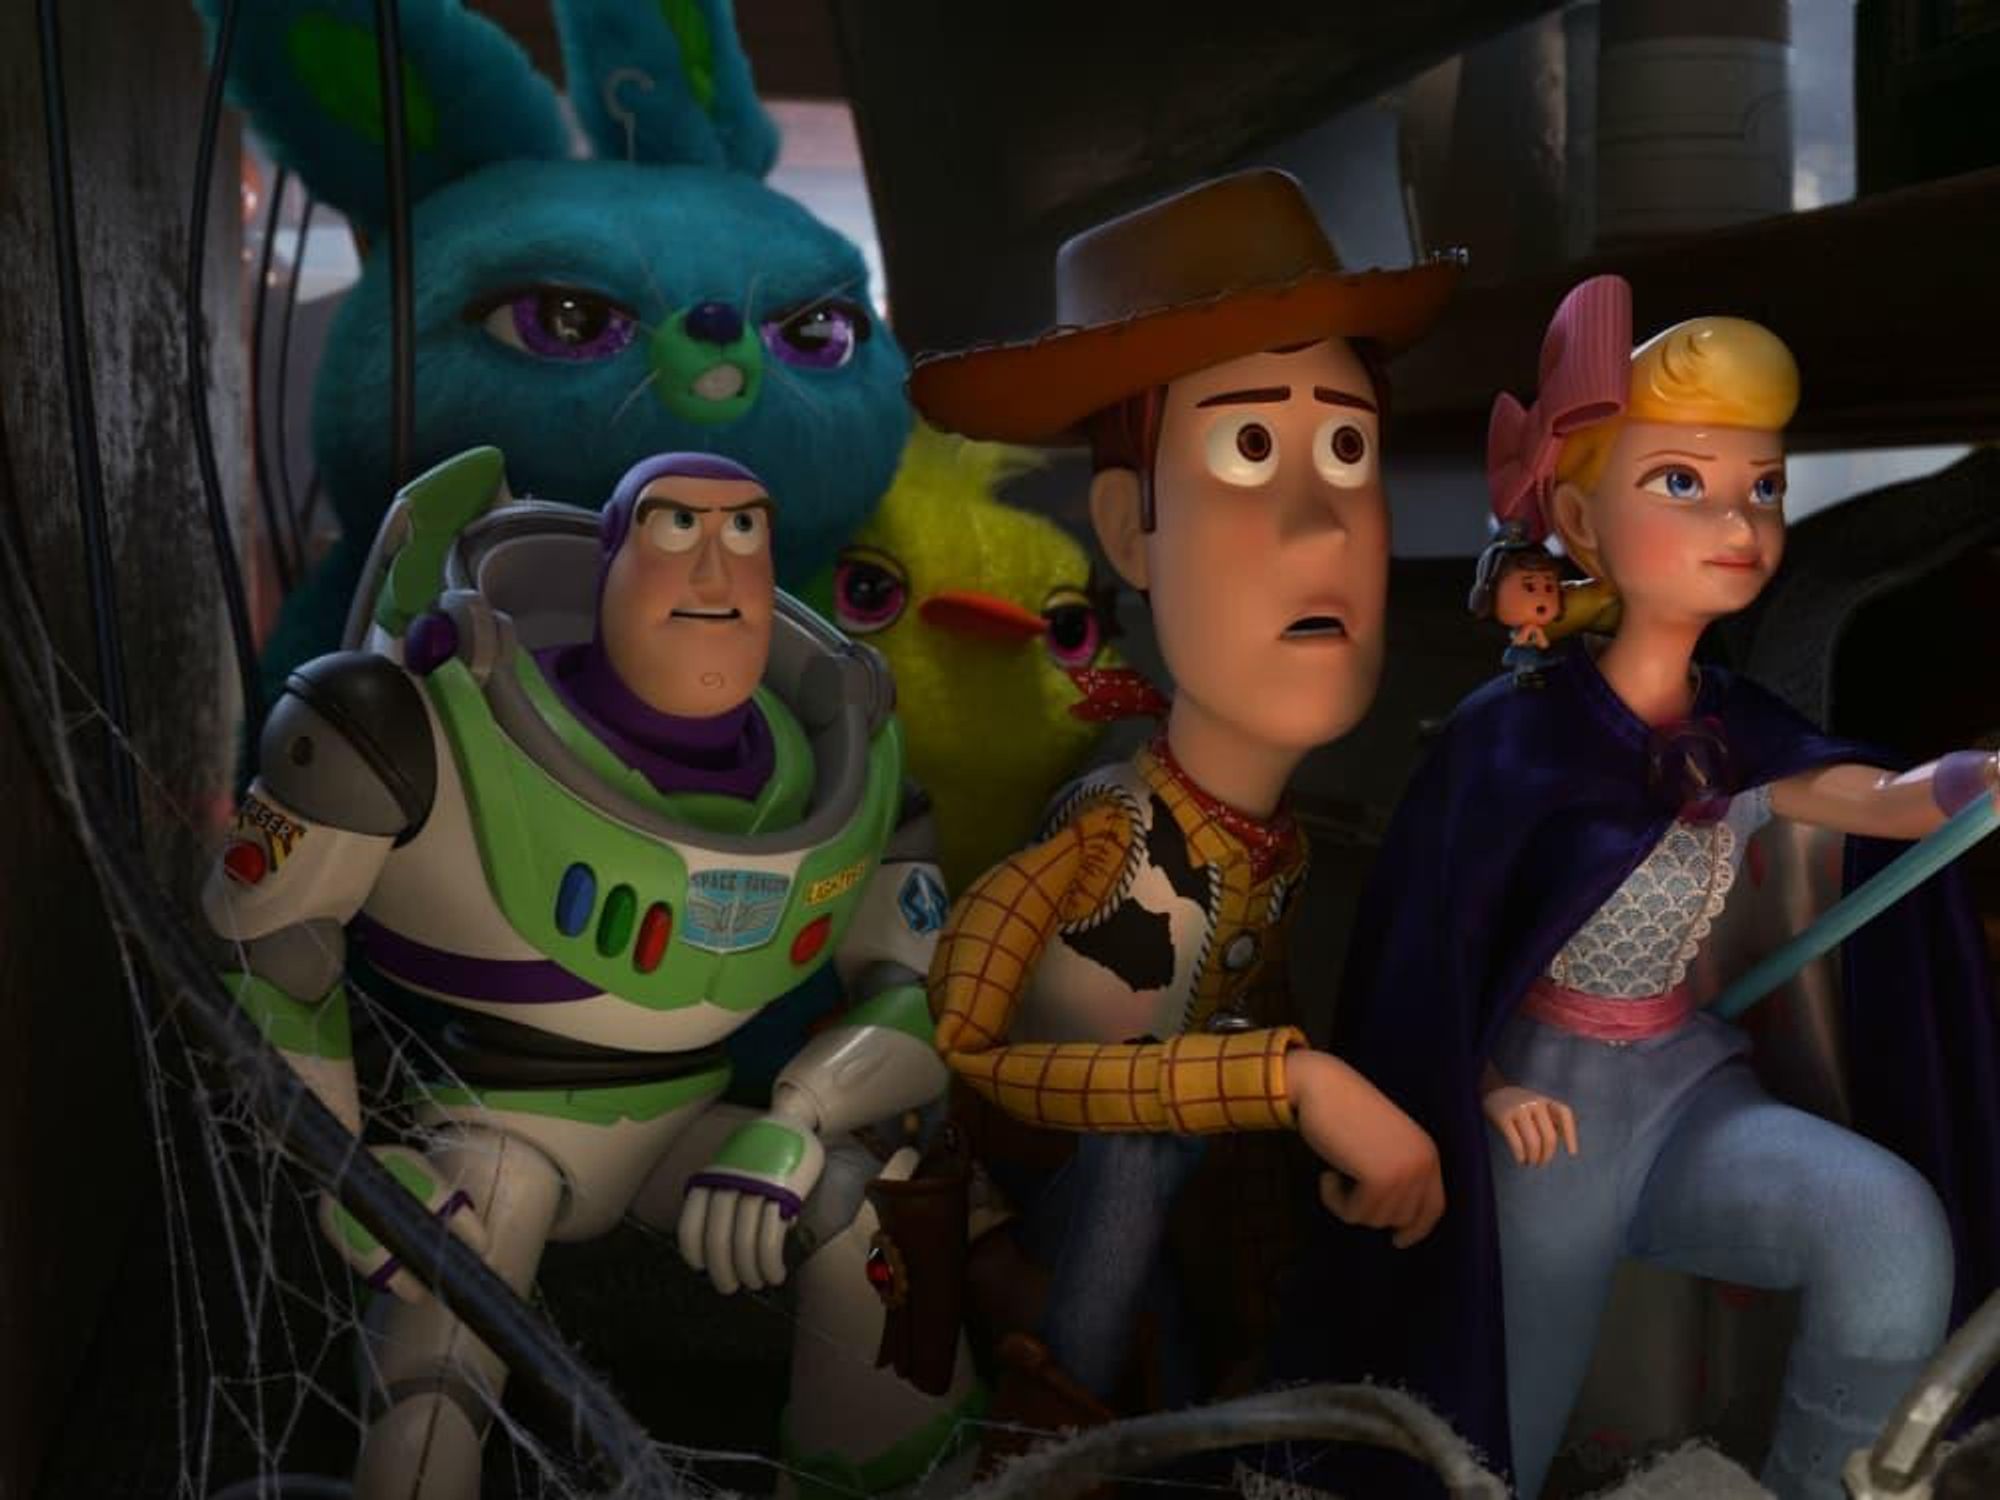 Buzz Lightyear, Bunny, Ducky, Woody, and Bo Peep in Toy Story 4